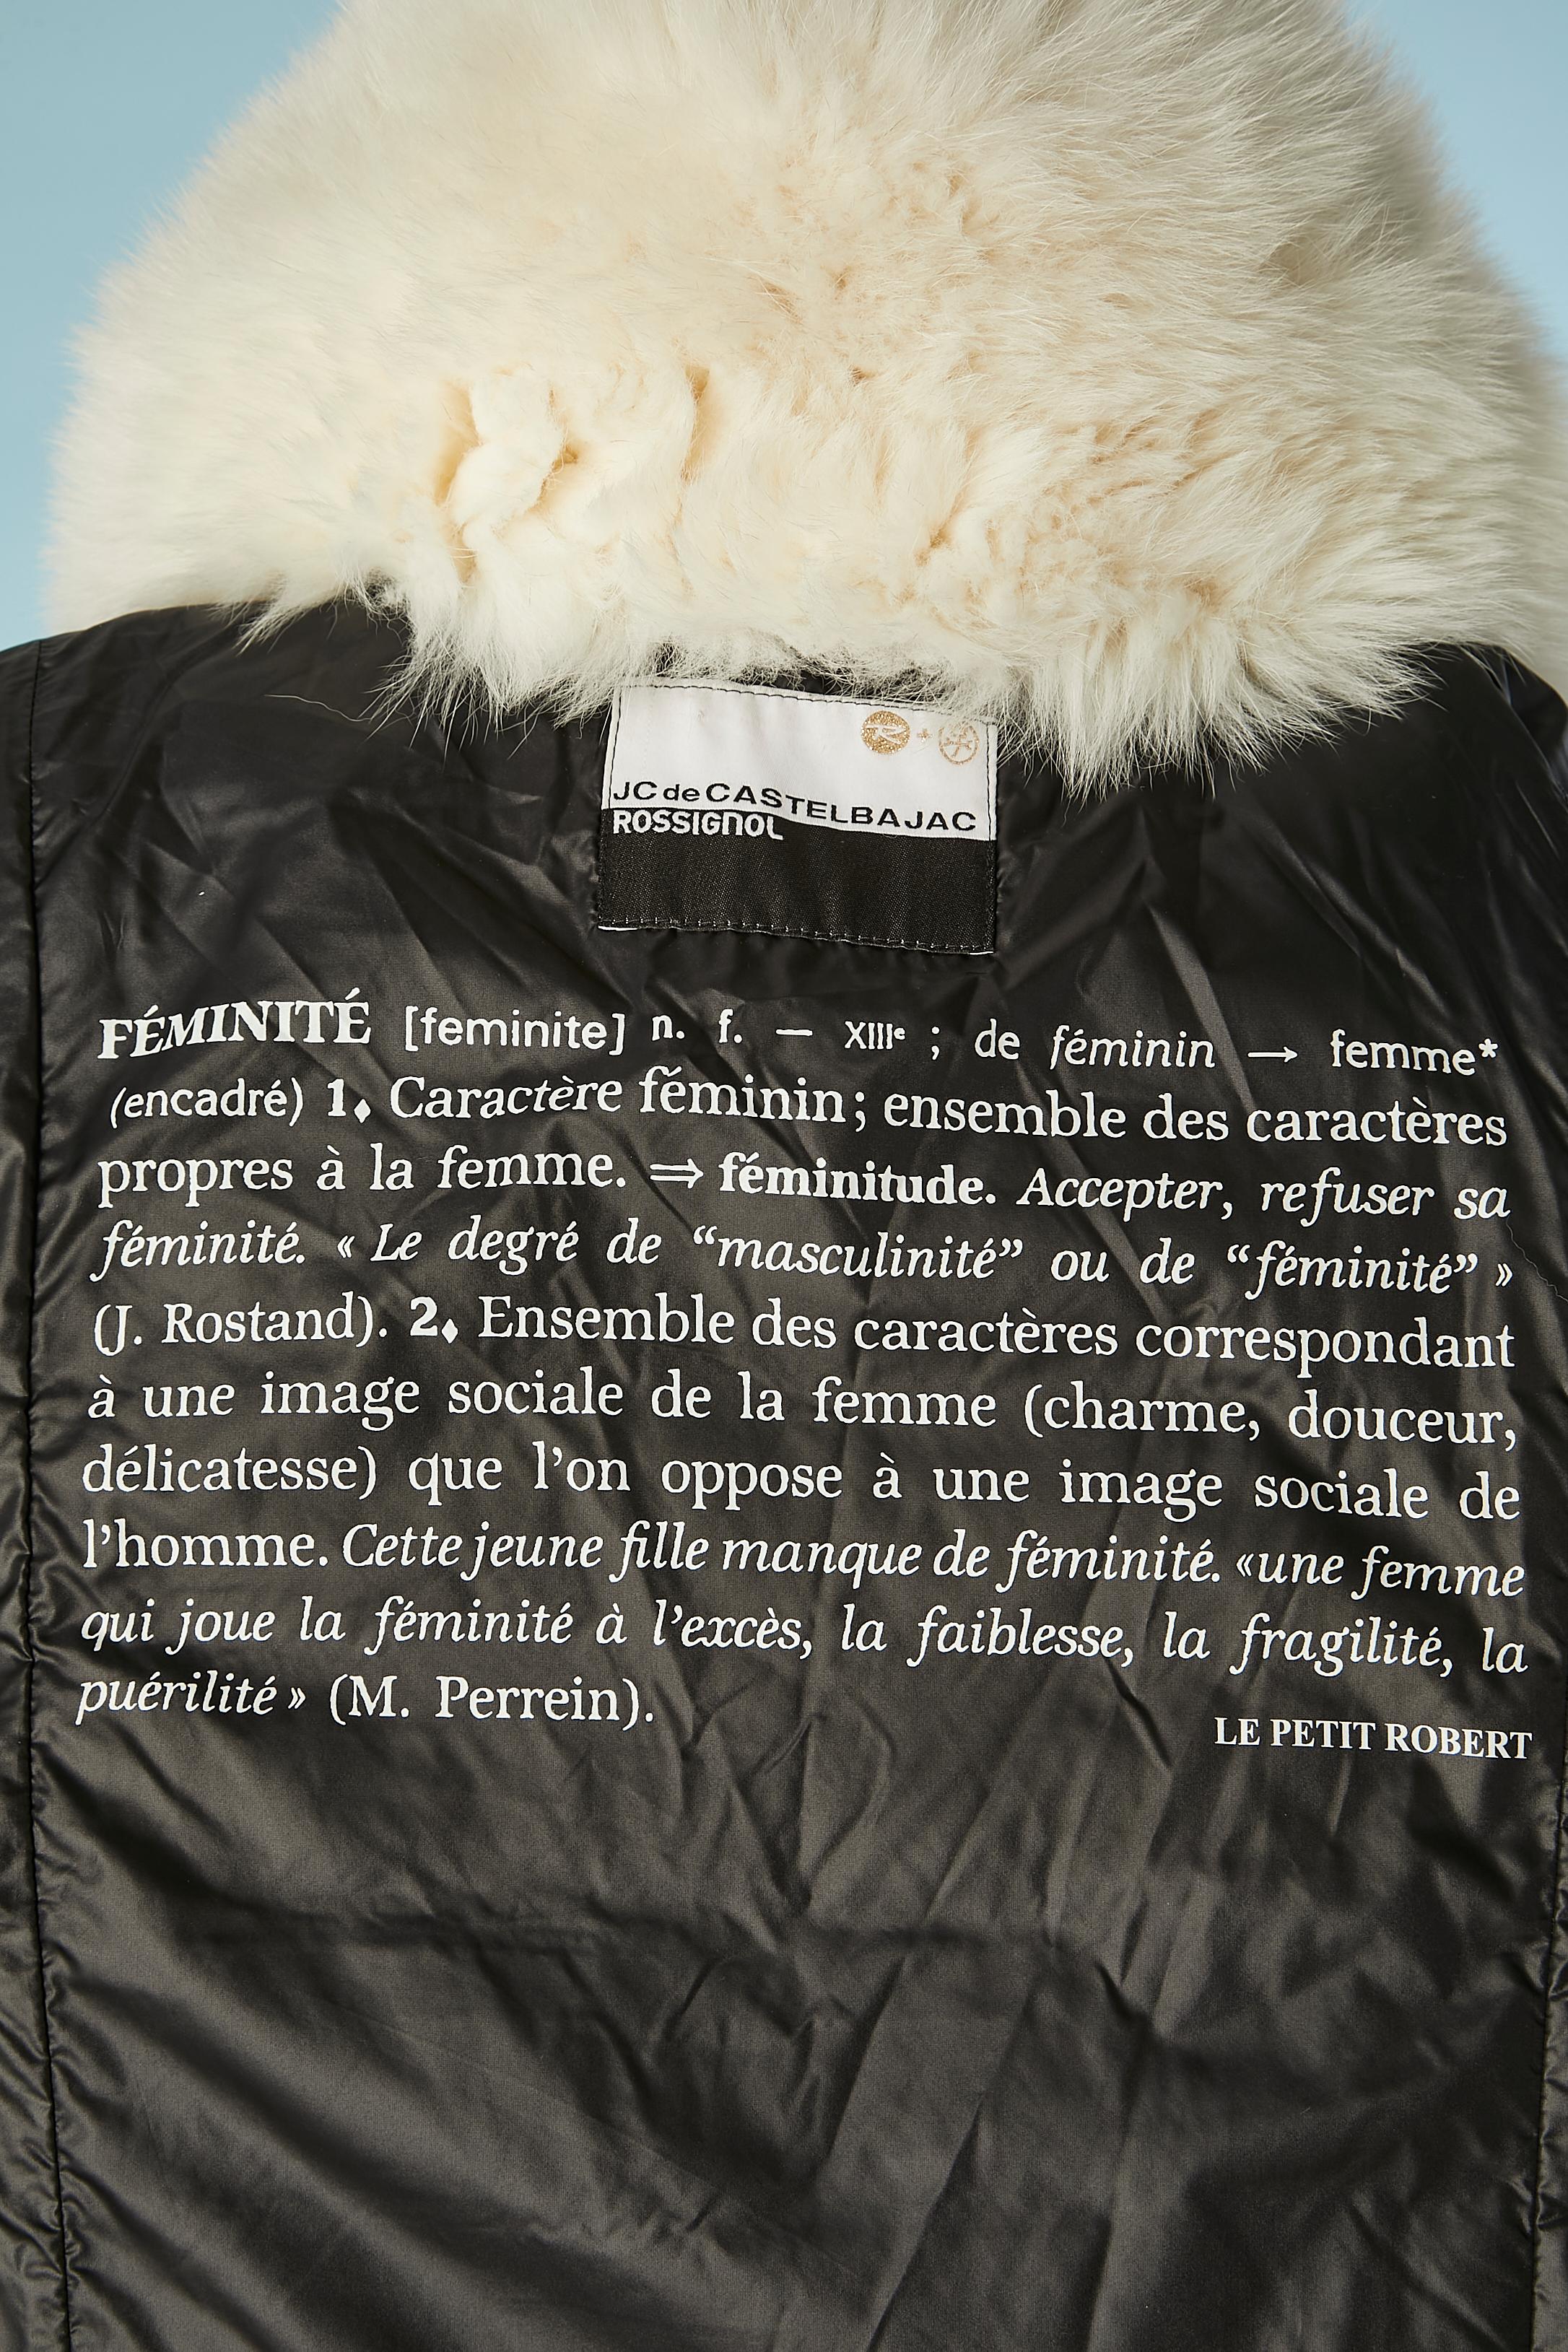 Silver sleeveless down jacket with feather collar J.C de Castelbajac & Rossignol For Sale 6